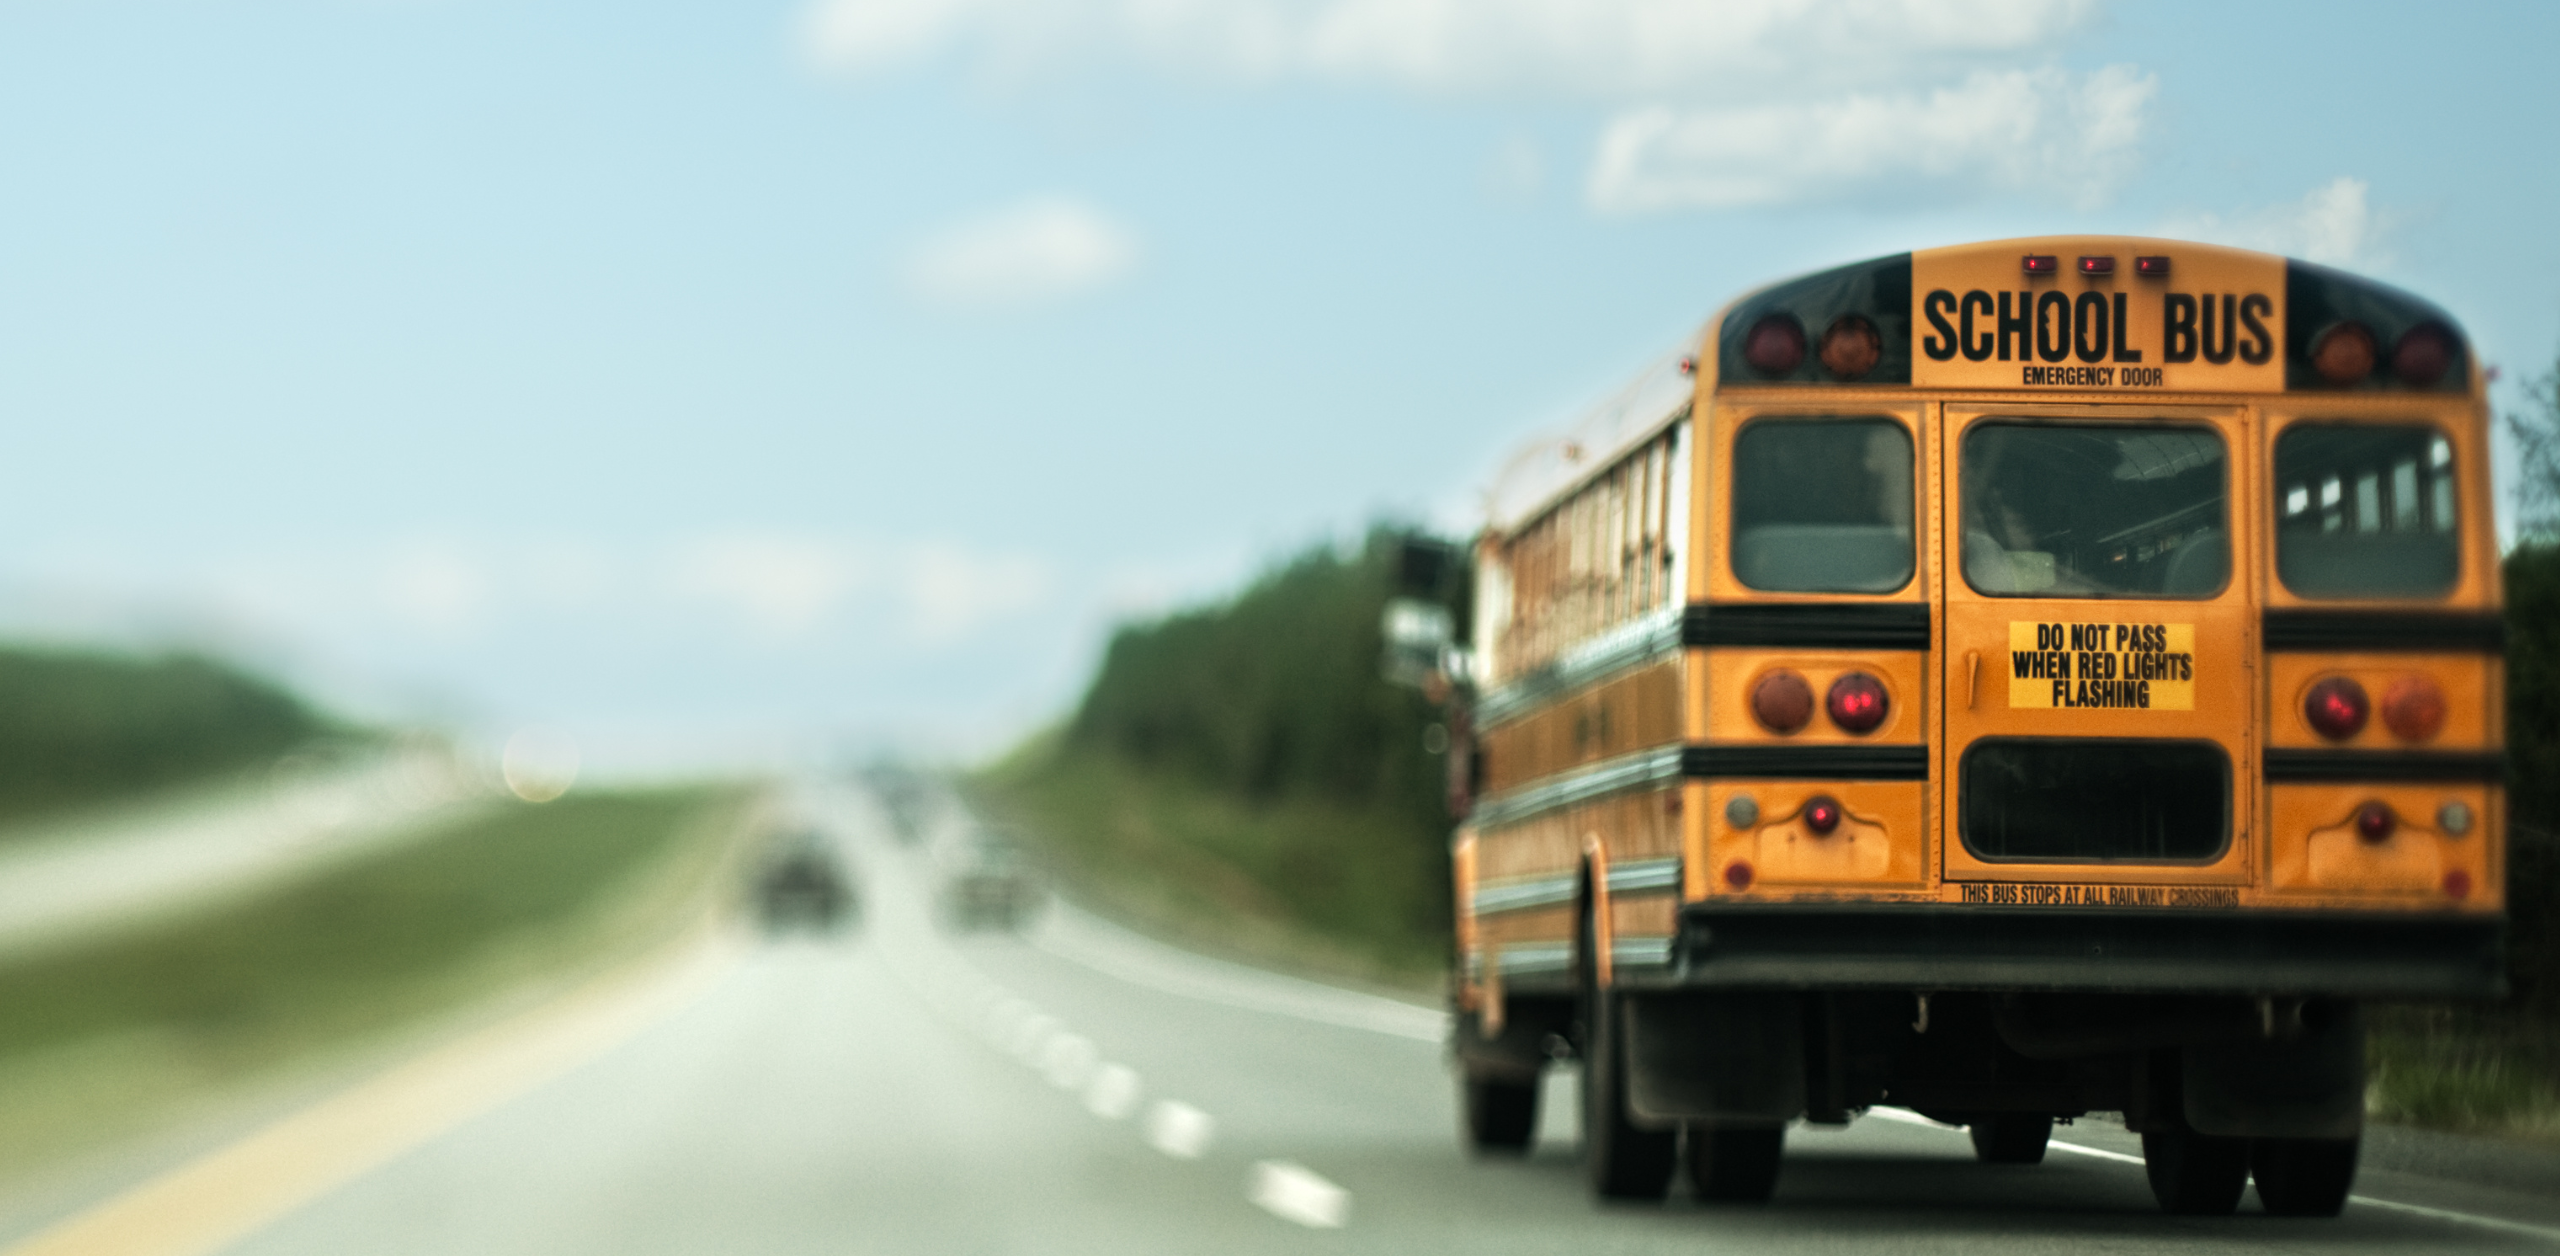 Are School Buses Safe?